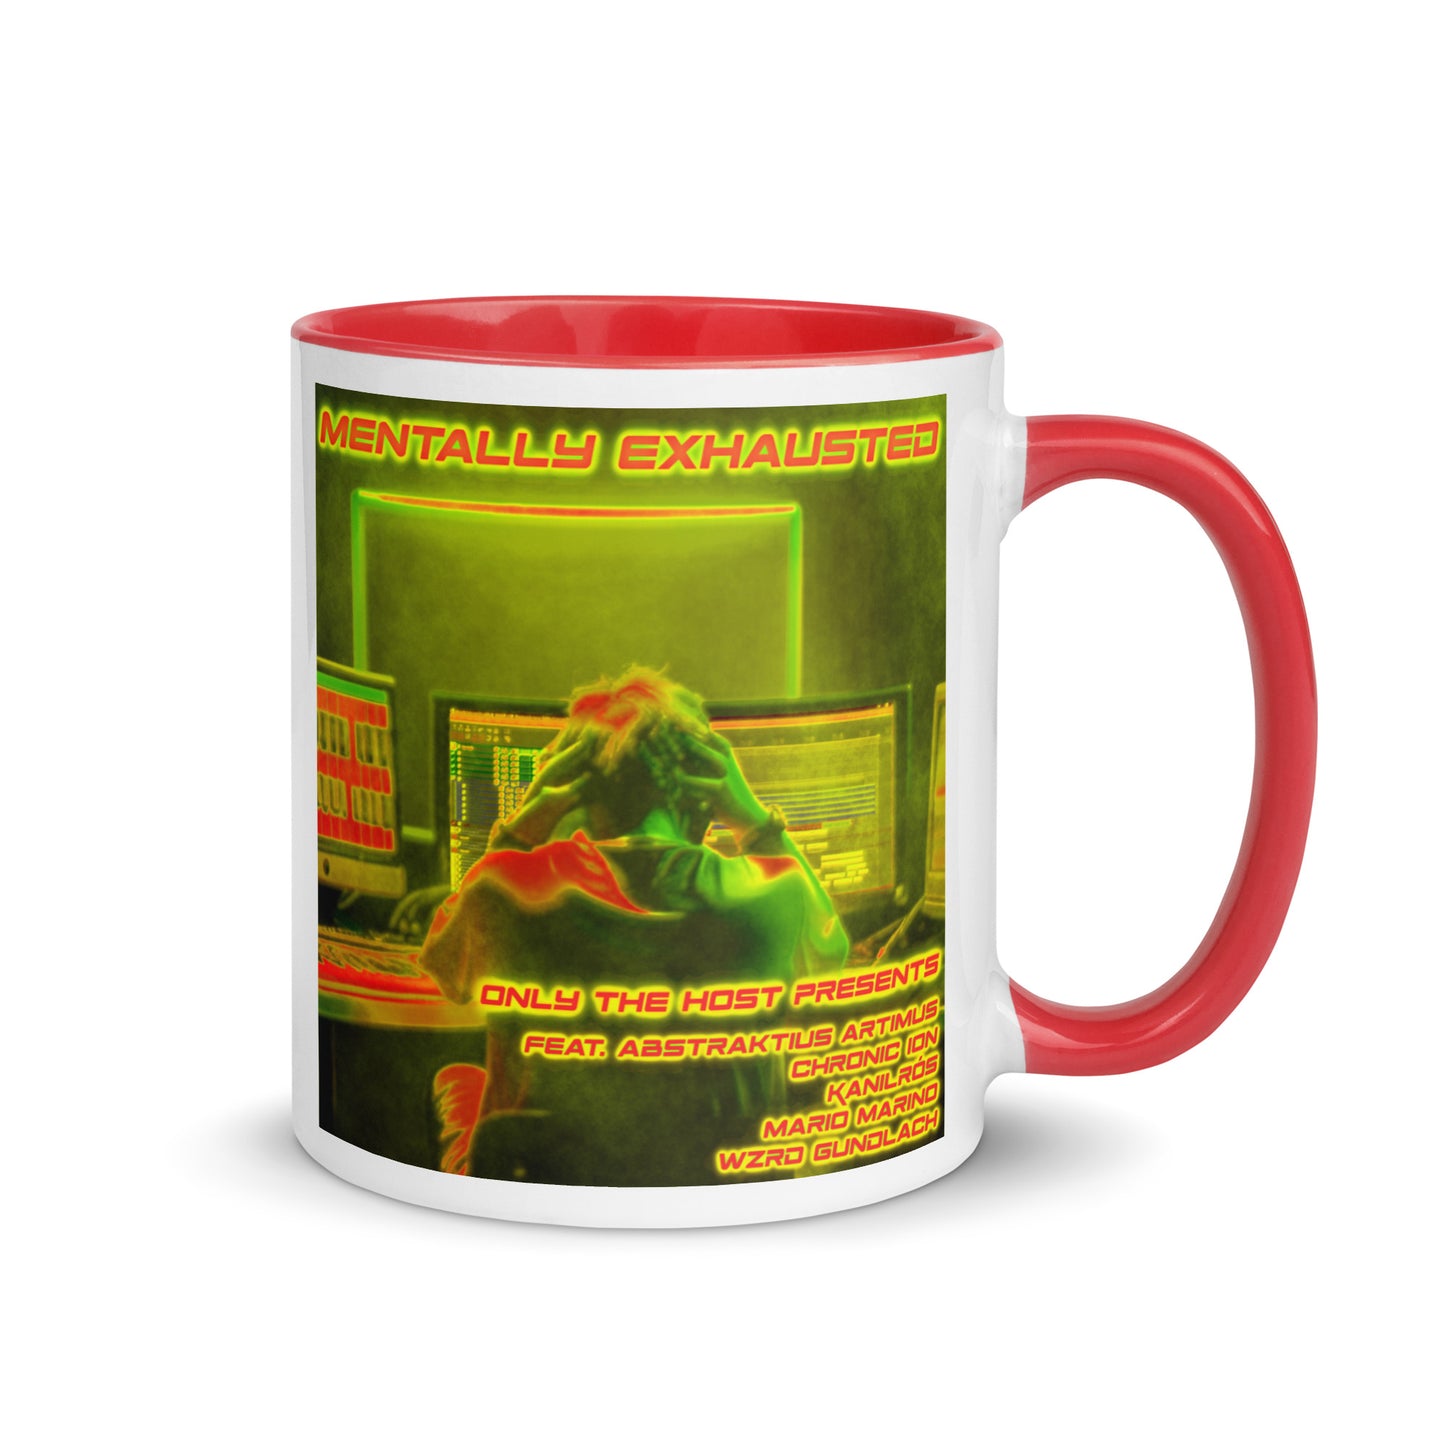 Only The Host Presents - Mentally Exhausted Mug With Color Inside